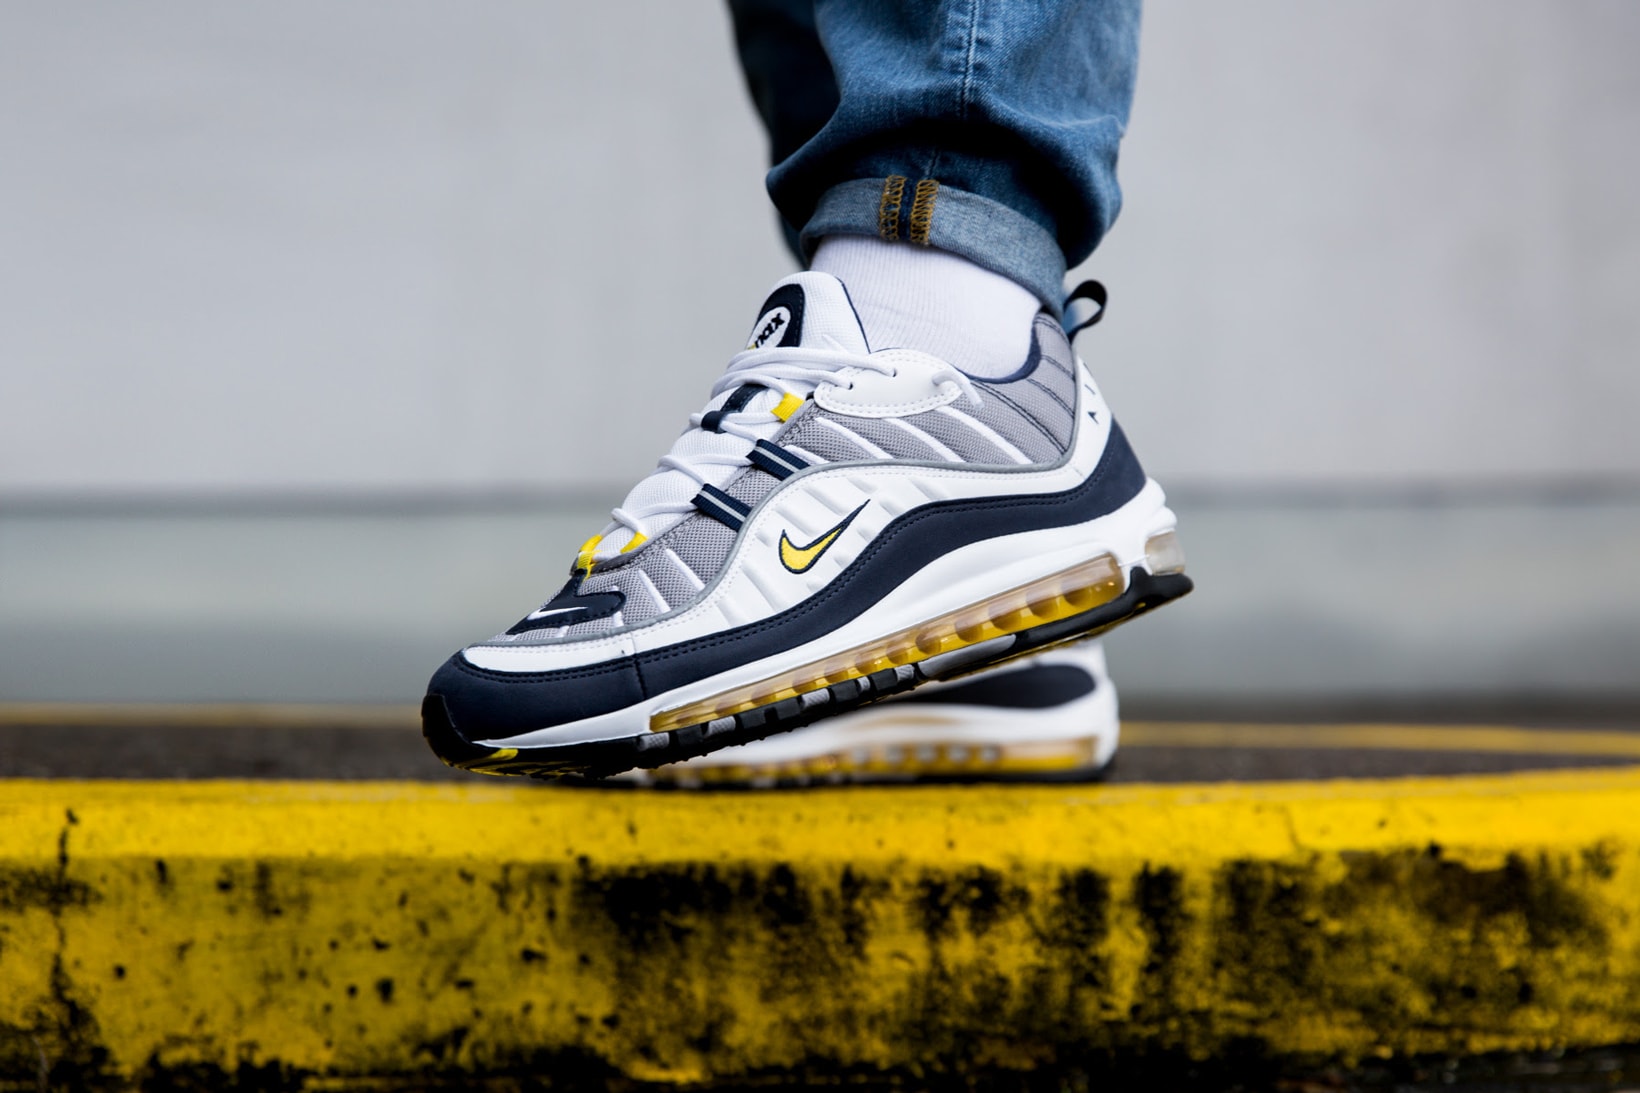 Nike Air Max 98 Gundam Tour Yellow Footwear Sneakers Shoes On Feet Closer Look Release Date Info Drops January 26 2018